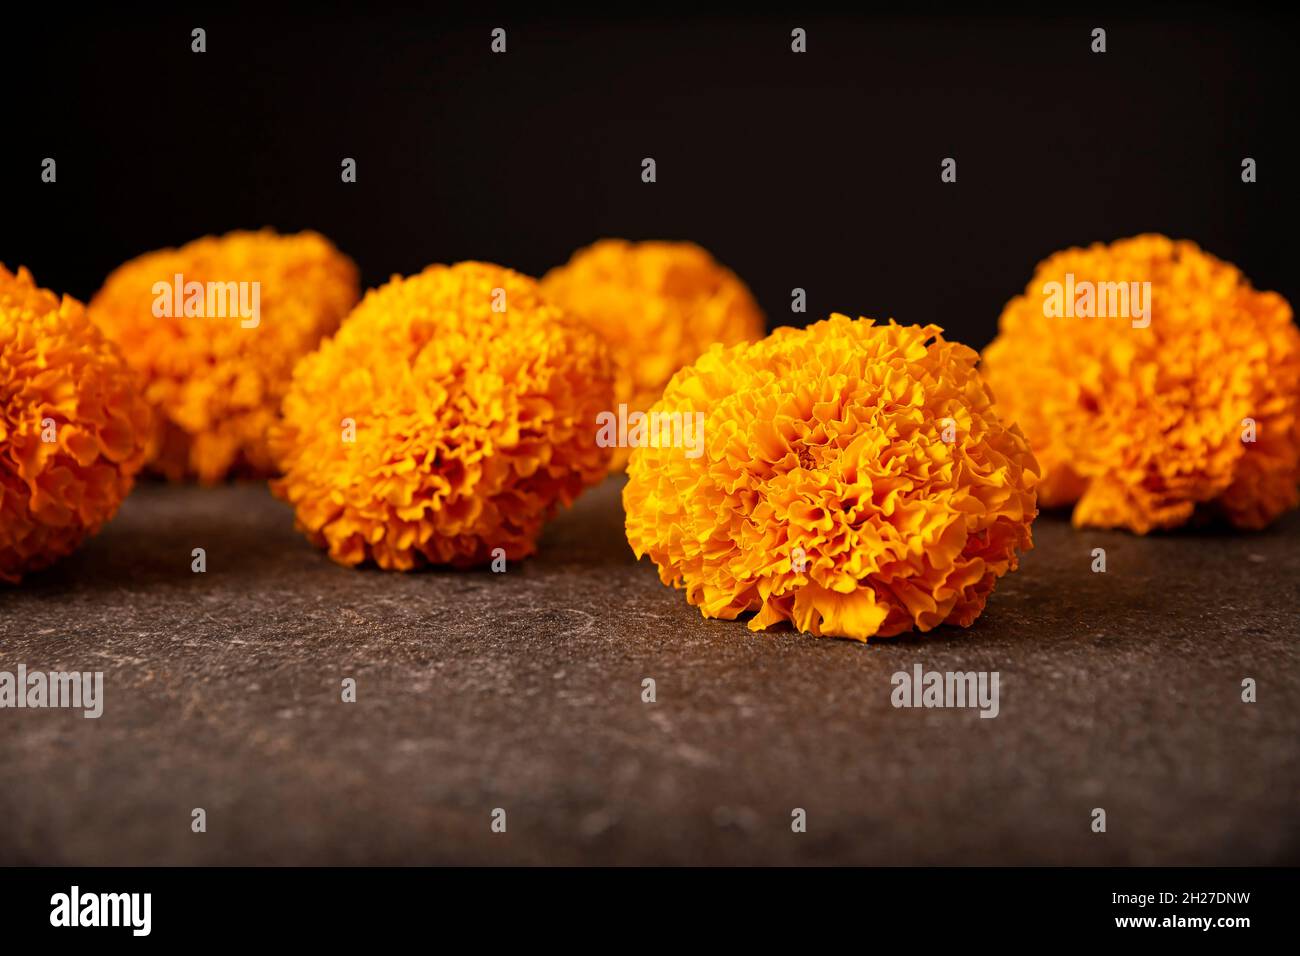 Cempasuchil orange flowers or Marigold. (Tagetes erecta) Traditionally used  in altars for the celebration of the day of the dead in Mexico Stock Photo  - Alamy